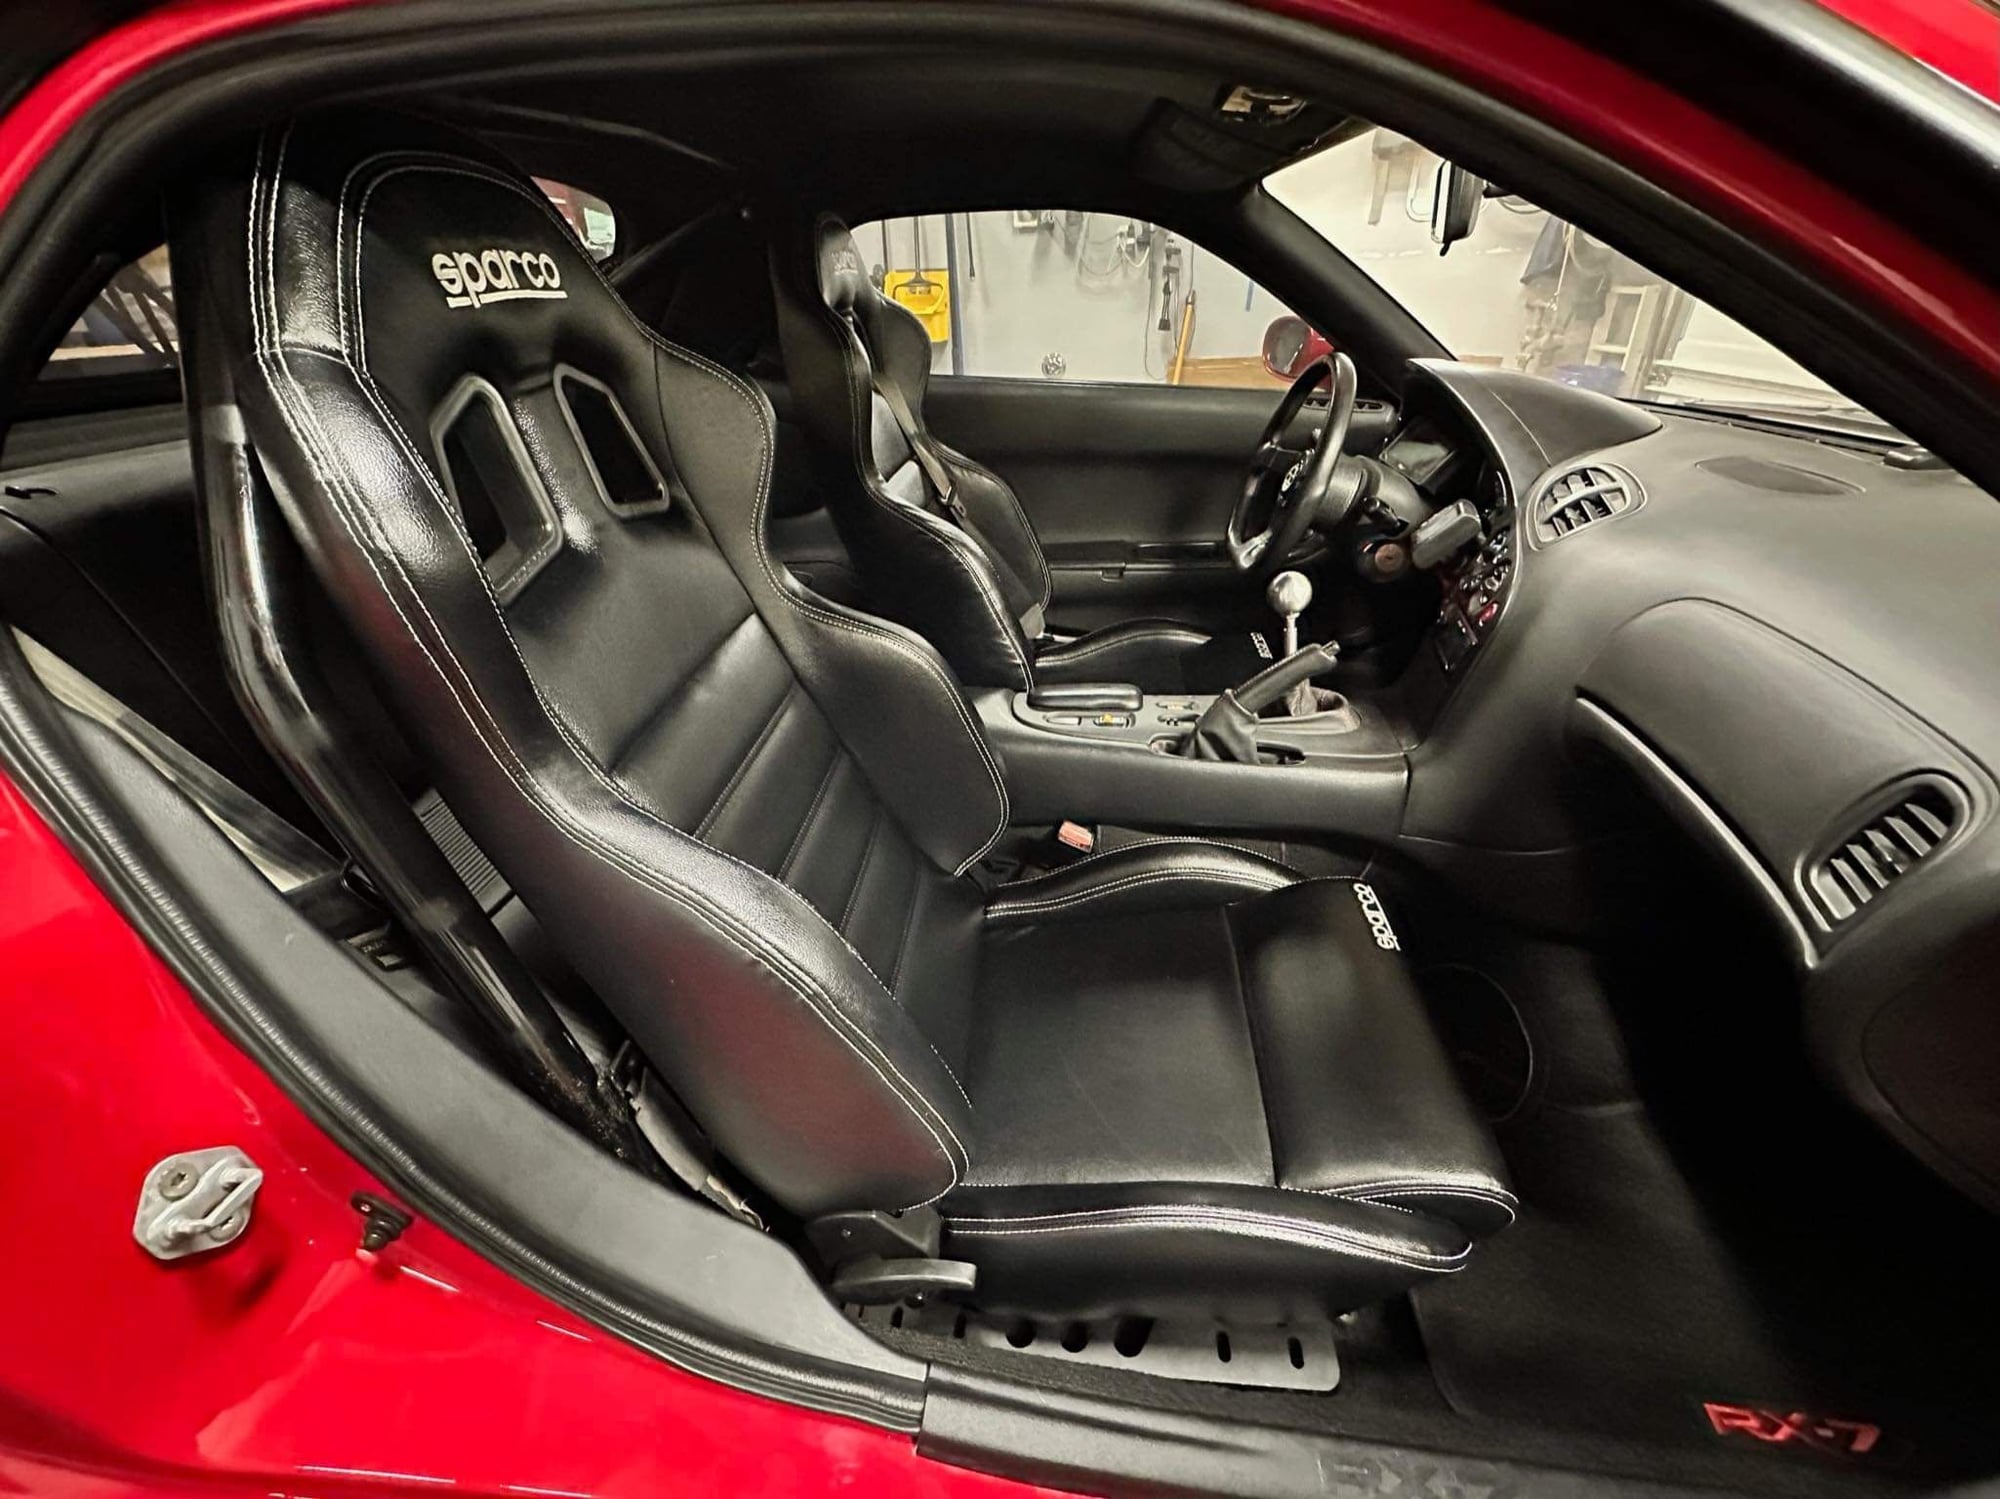 1993 Mazda RX-7 - 1993 VR FS- Very special LSX twin turbo Swap - Used - VIN JM1FD3318P0204561 - 74,000 Miles - 8 cyl - 2WD - Manual - Coupe - Red - St. Louis, MO 63132, United States